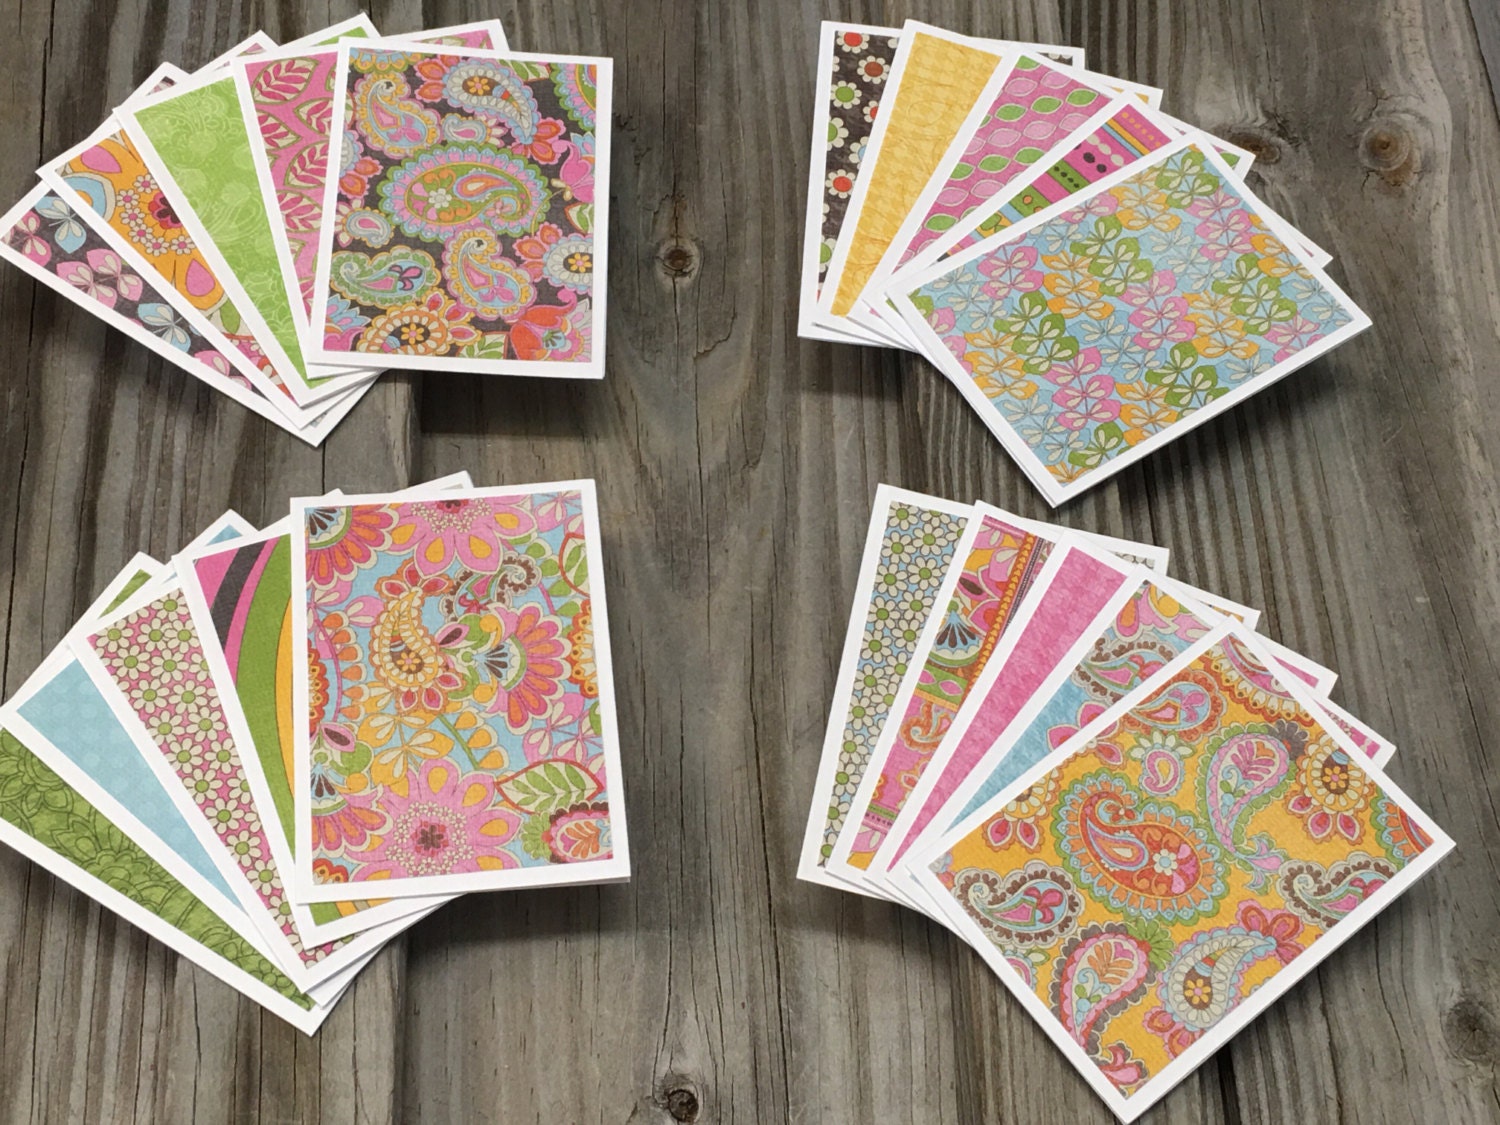 20-Assorted Paisley/Floral Blank Mini Note Cards( 3 1/2x2  1/2)w/Envelopes-Matching Tags Also Available-Gifts/Thank You Card/Lunch Box  Card